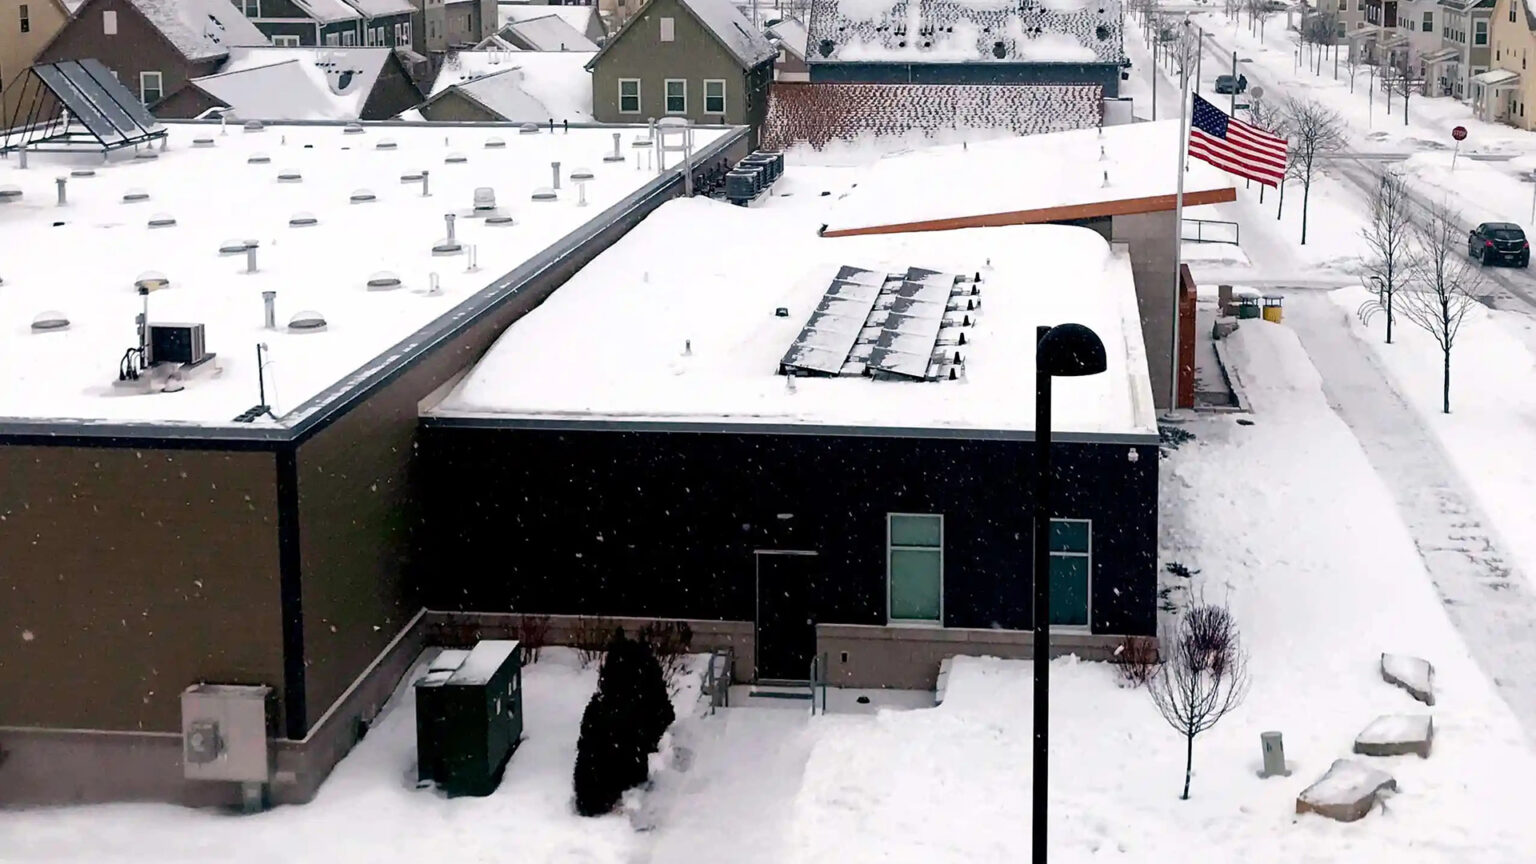 Solar panels are situated on the flat roof of a section of a multi-segment building, with a U.S. flag, houses and a street in the background, all covered with a layer of snow.